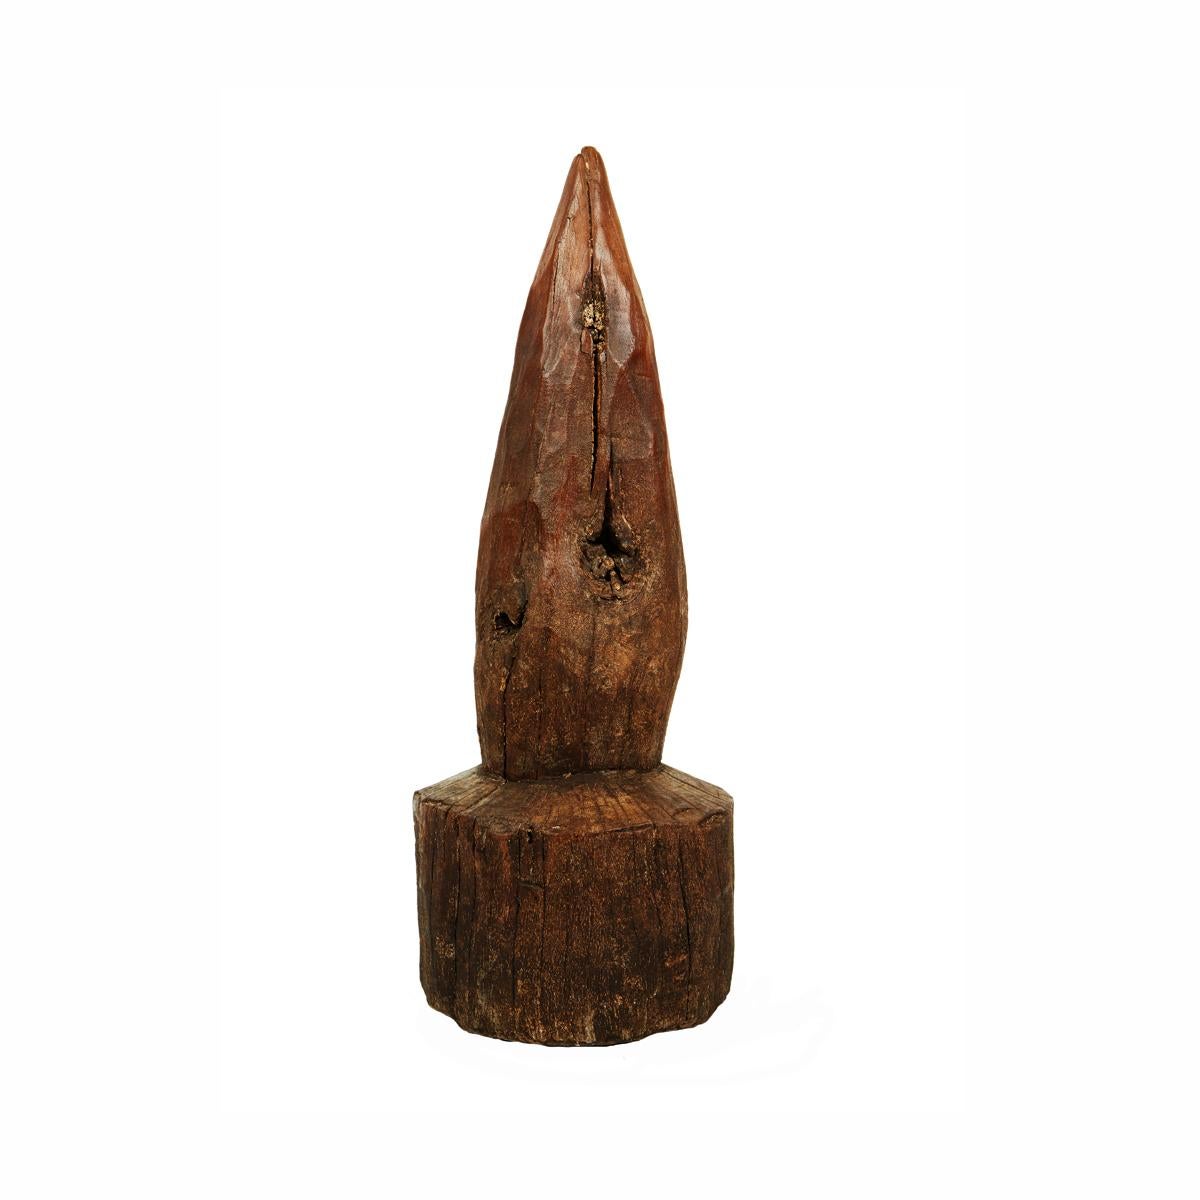 A single piece of solid mango wood, hand carved into a standing cone, circa 1960. Use it as door stoppers, or in a group for an eye-catching accent in any rustic or eclectic decor, indoors or outdoors. 

